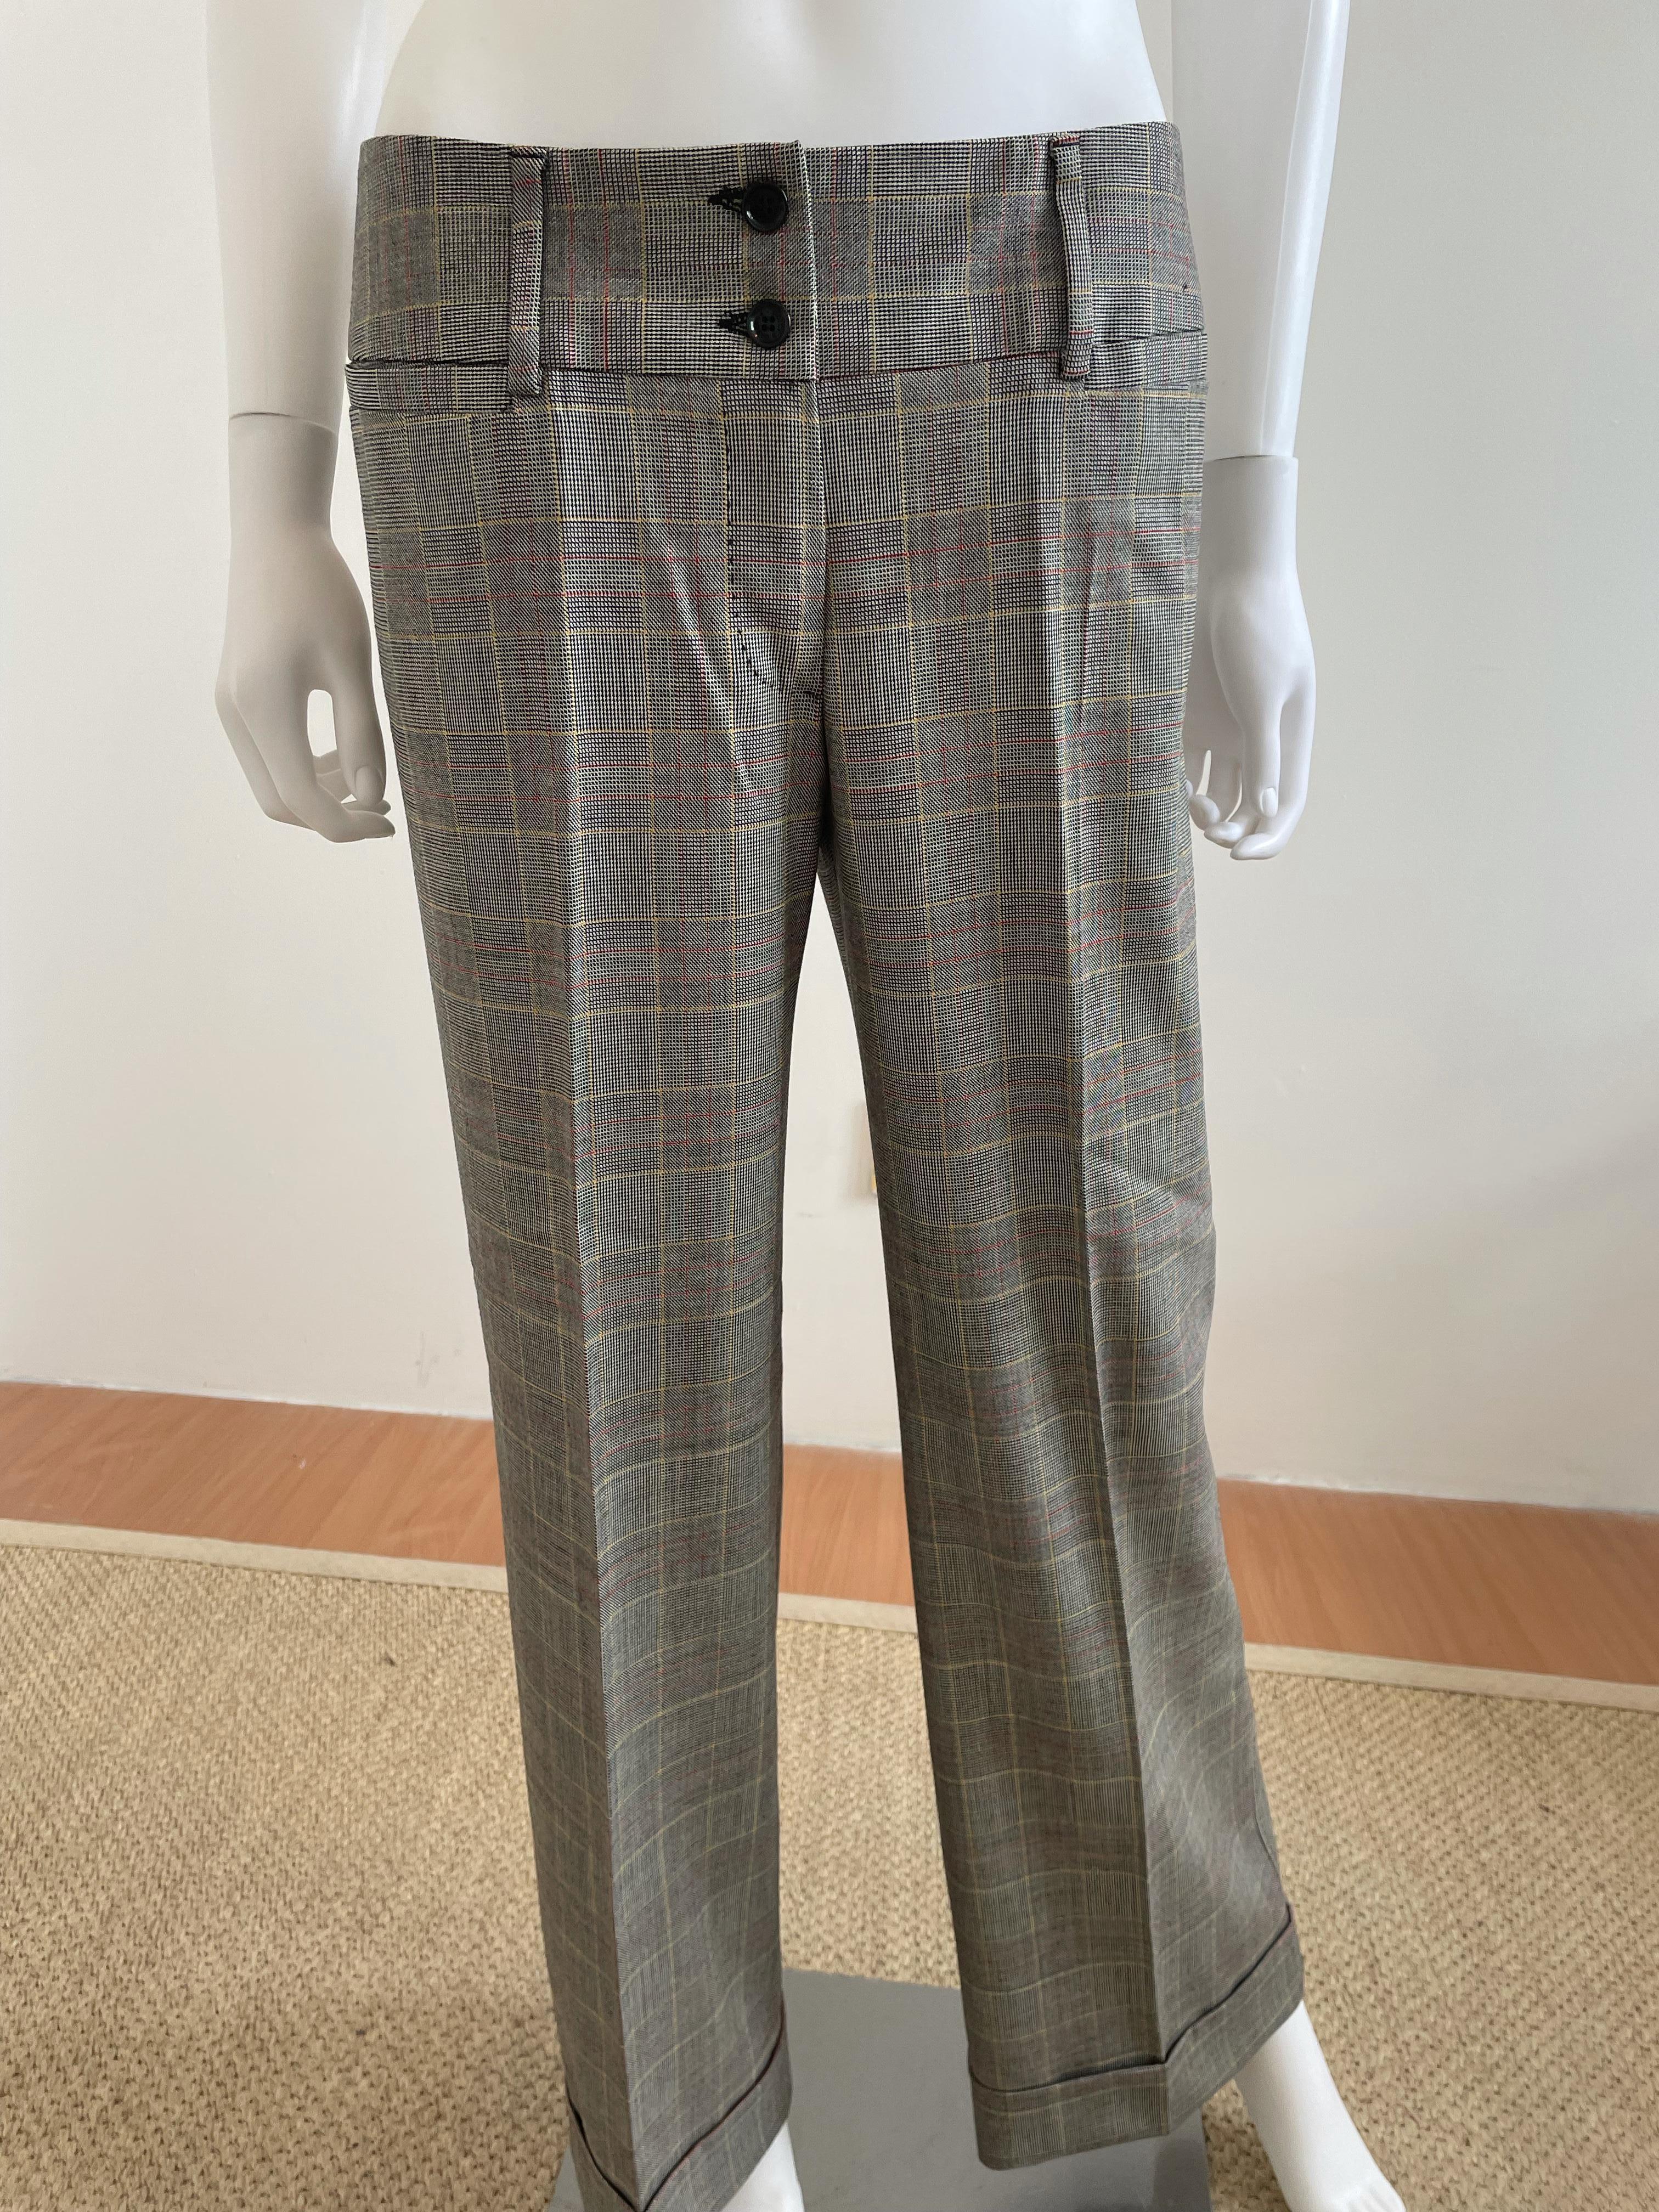 Dolce and Gabbana Wool Plaid Peak Lapel Blazer with Matching Pants Suit For Sale 3